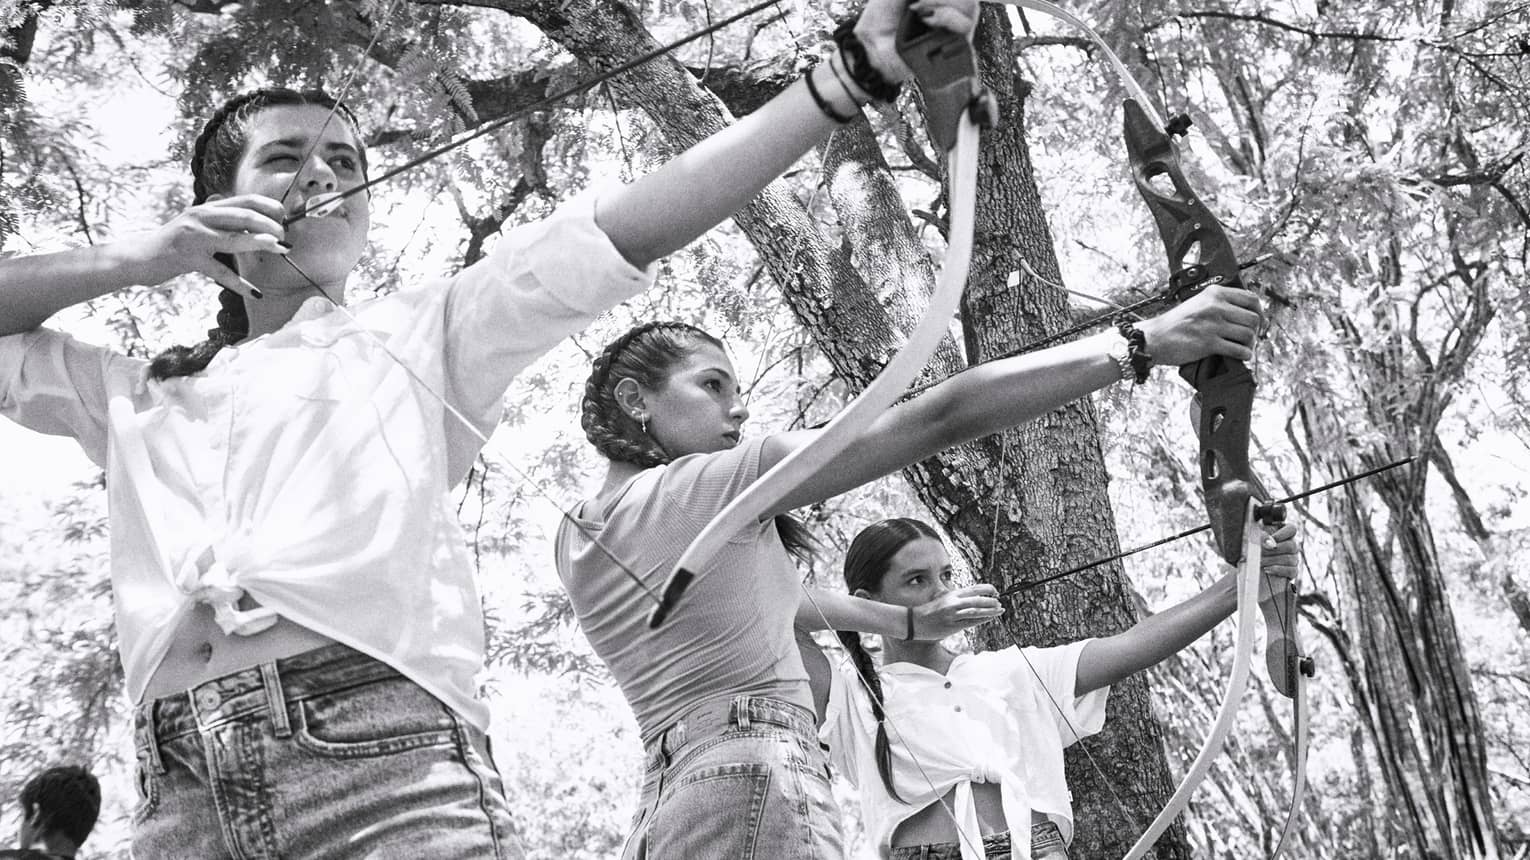 Black and white photo of three young girls aiming traditional archery bows in a forest